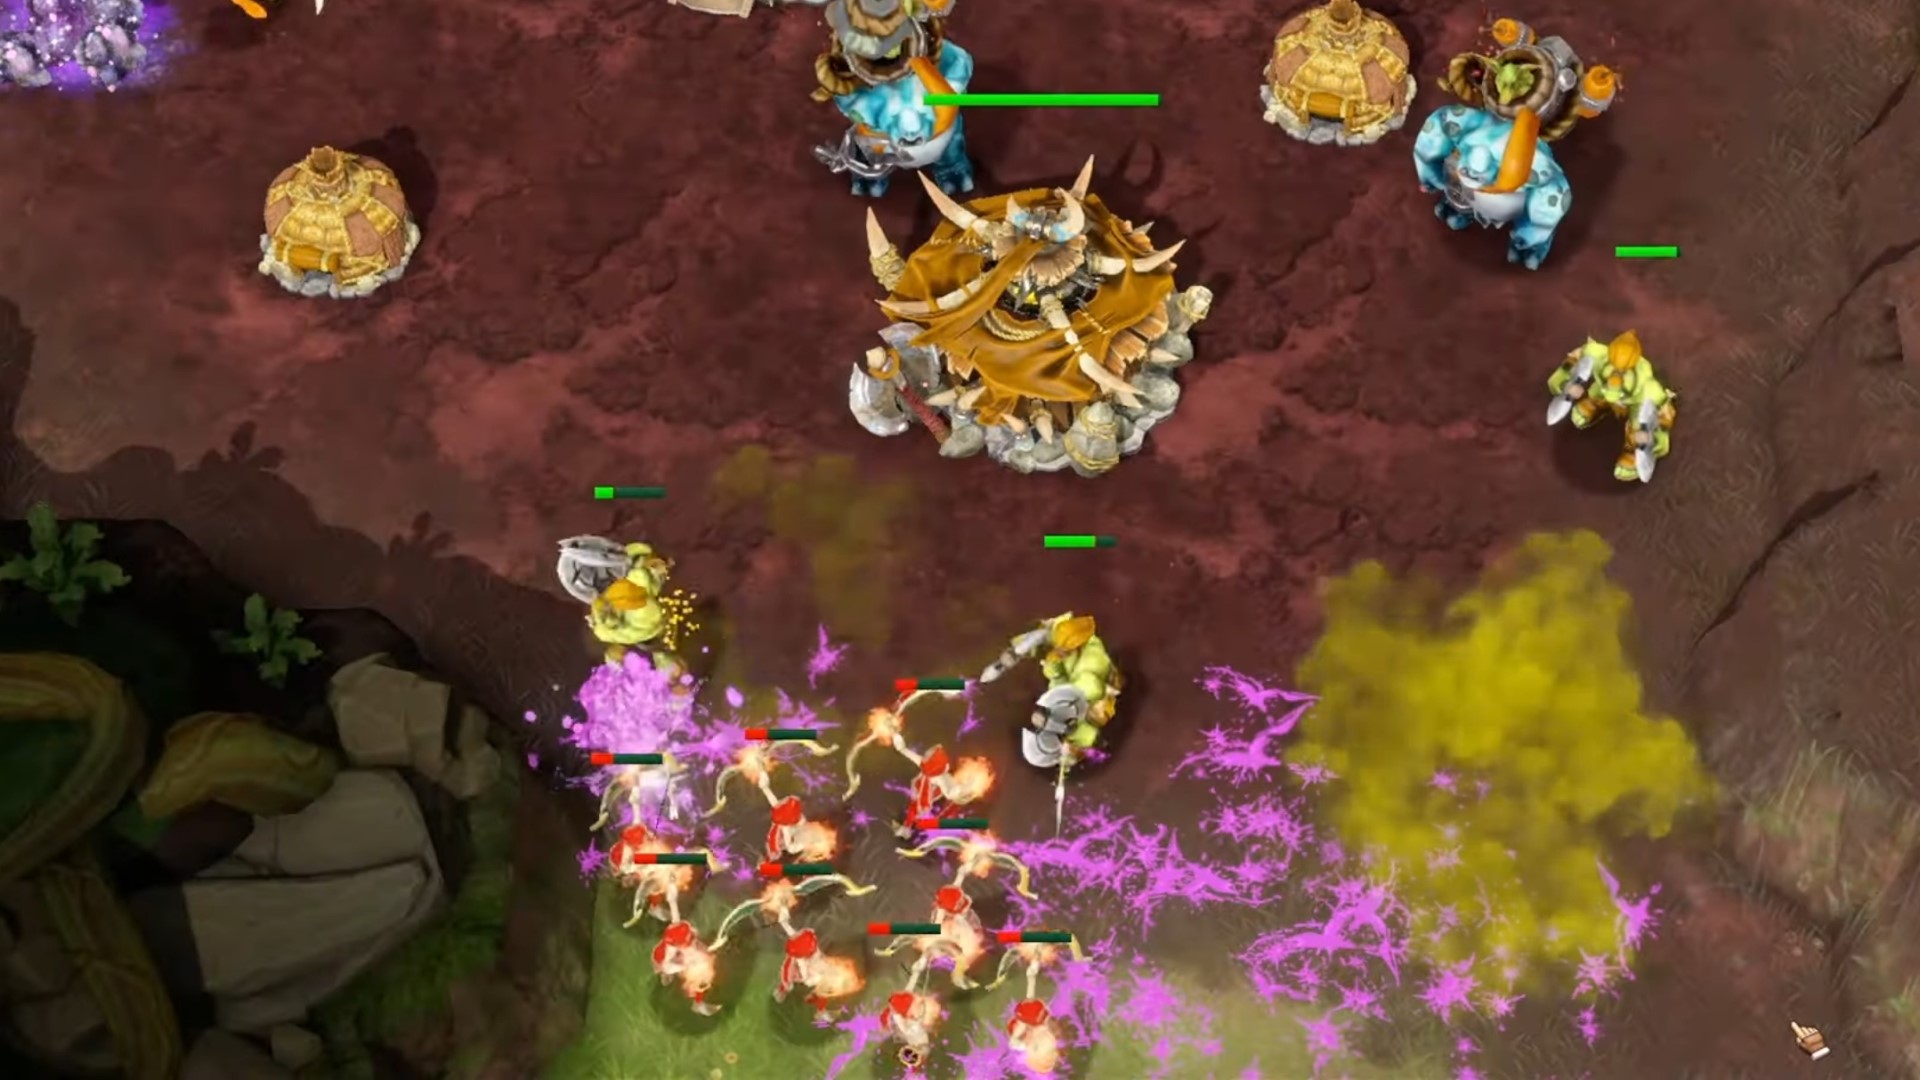 Warcraft-style RTS The Purple War begins its open playtest